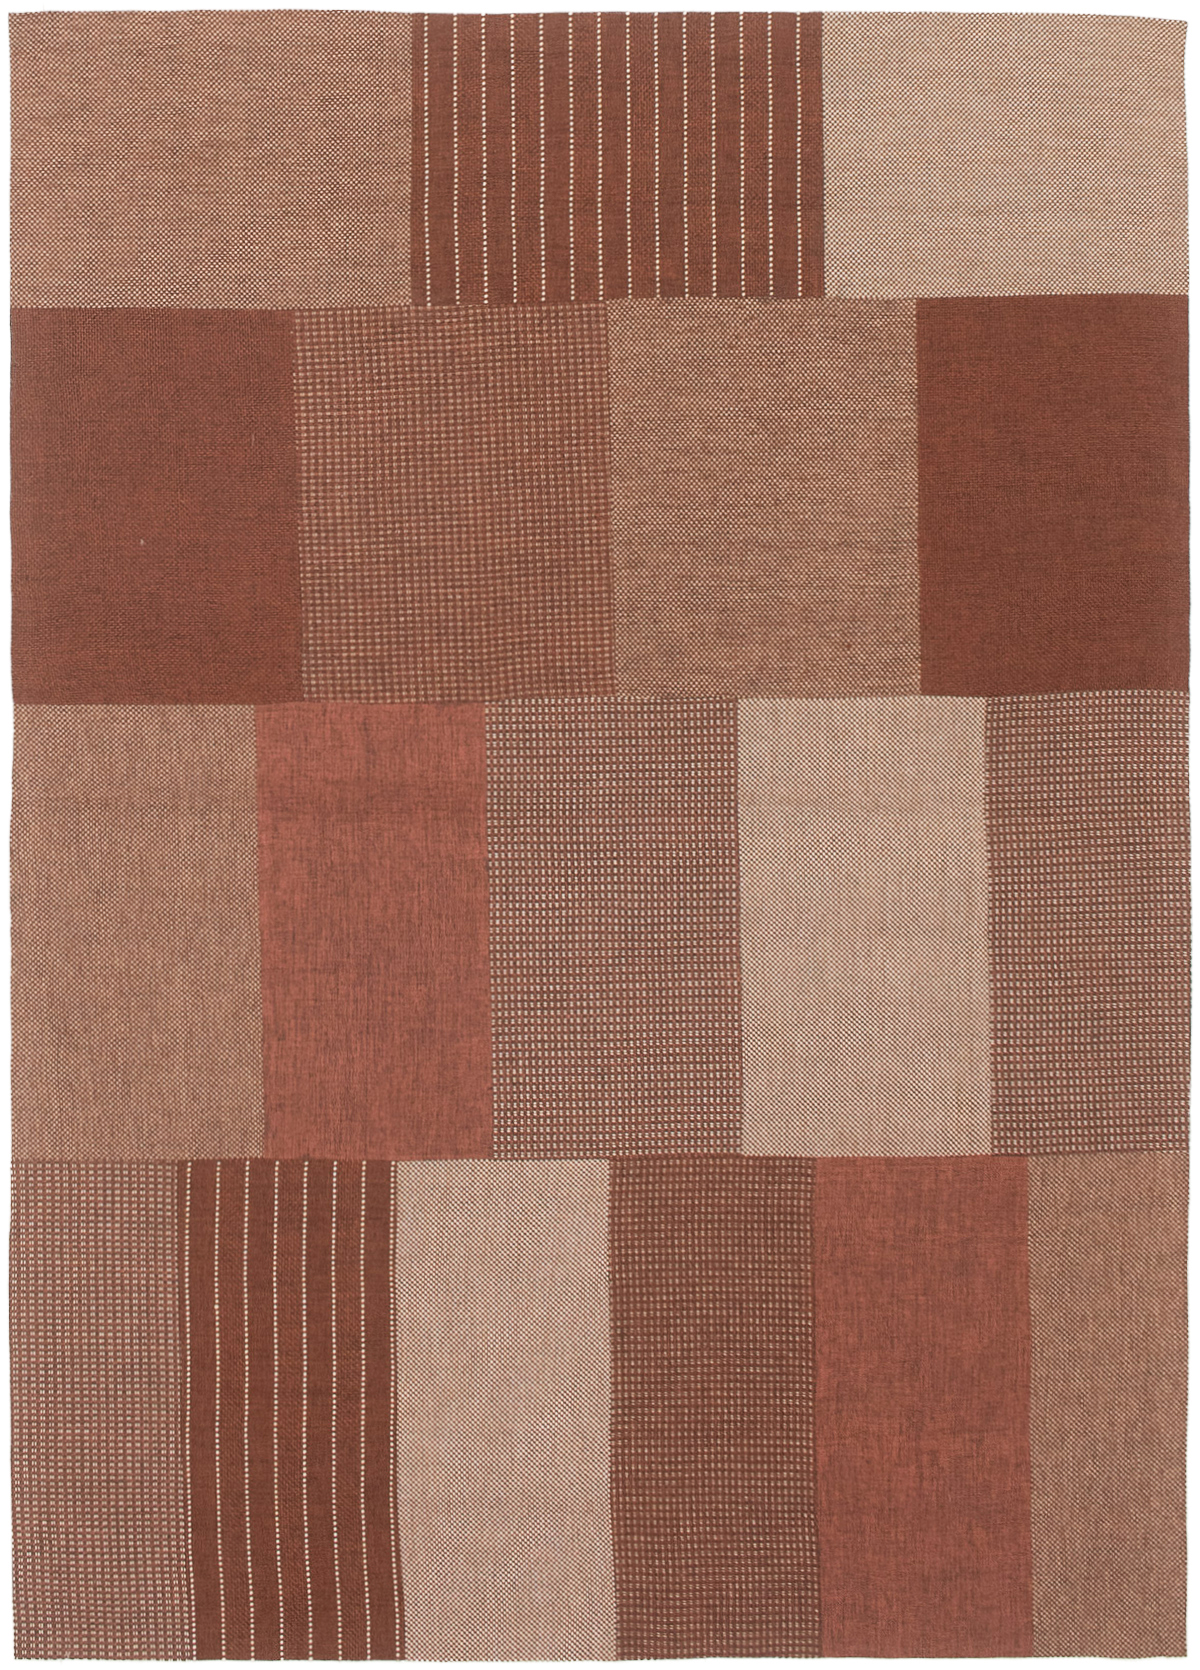 Handmade Collage Brown, Tan Chenille Rug 4'8" x 6'7" Size: 4'8" x 6'7"  